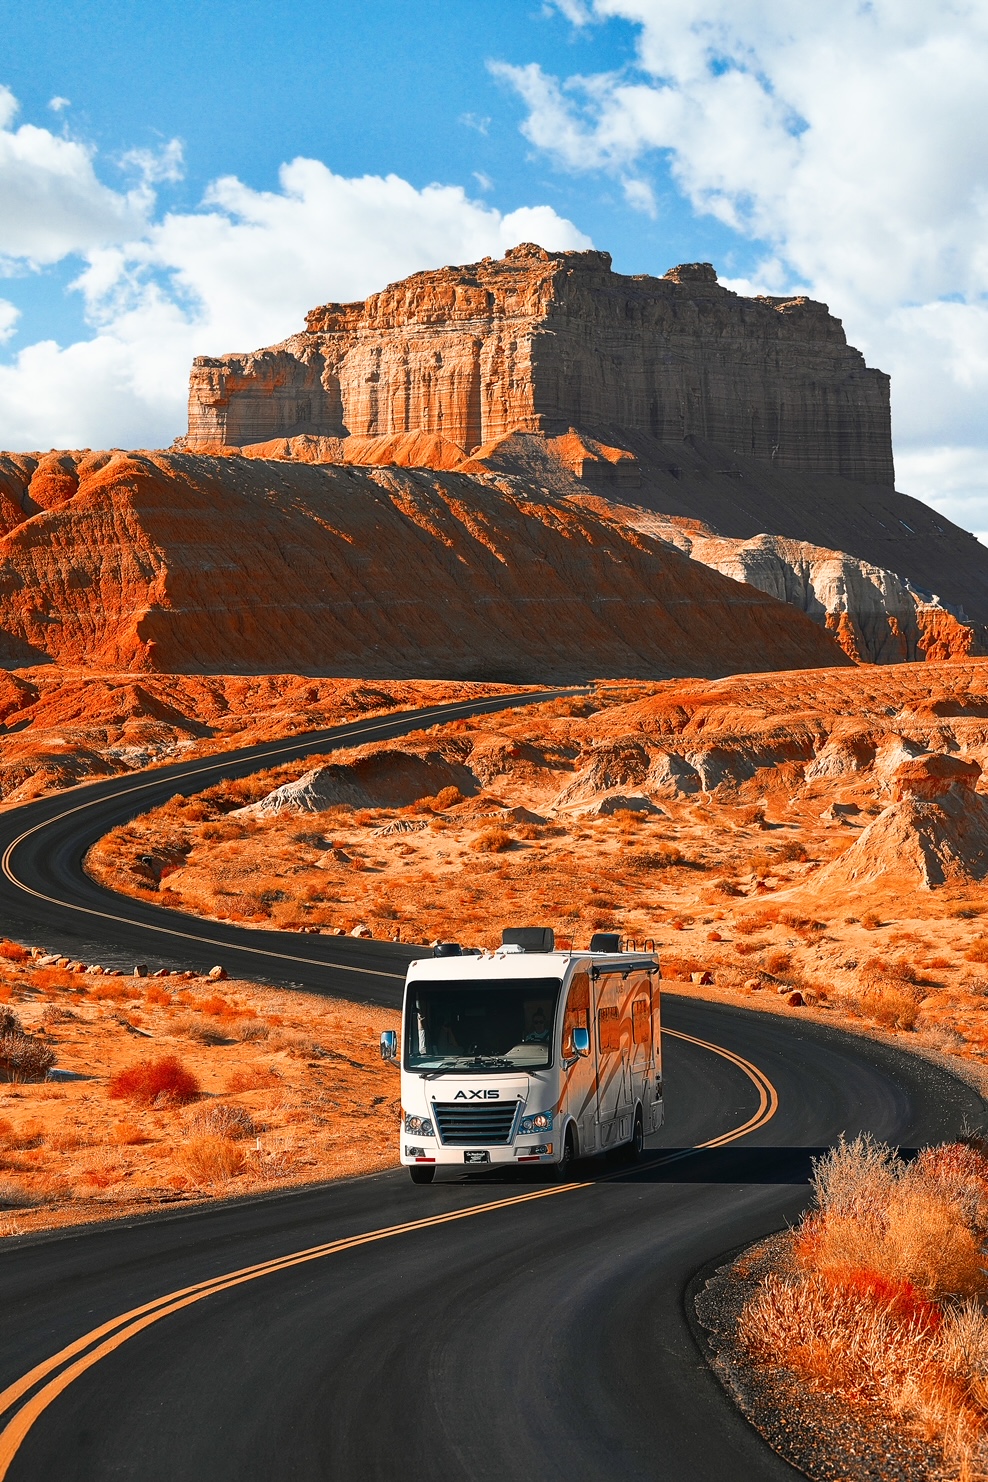 RV driving down a twisting road in a rugged, red colored Utah landscape during a Utah road trip.